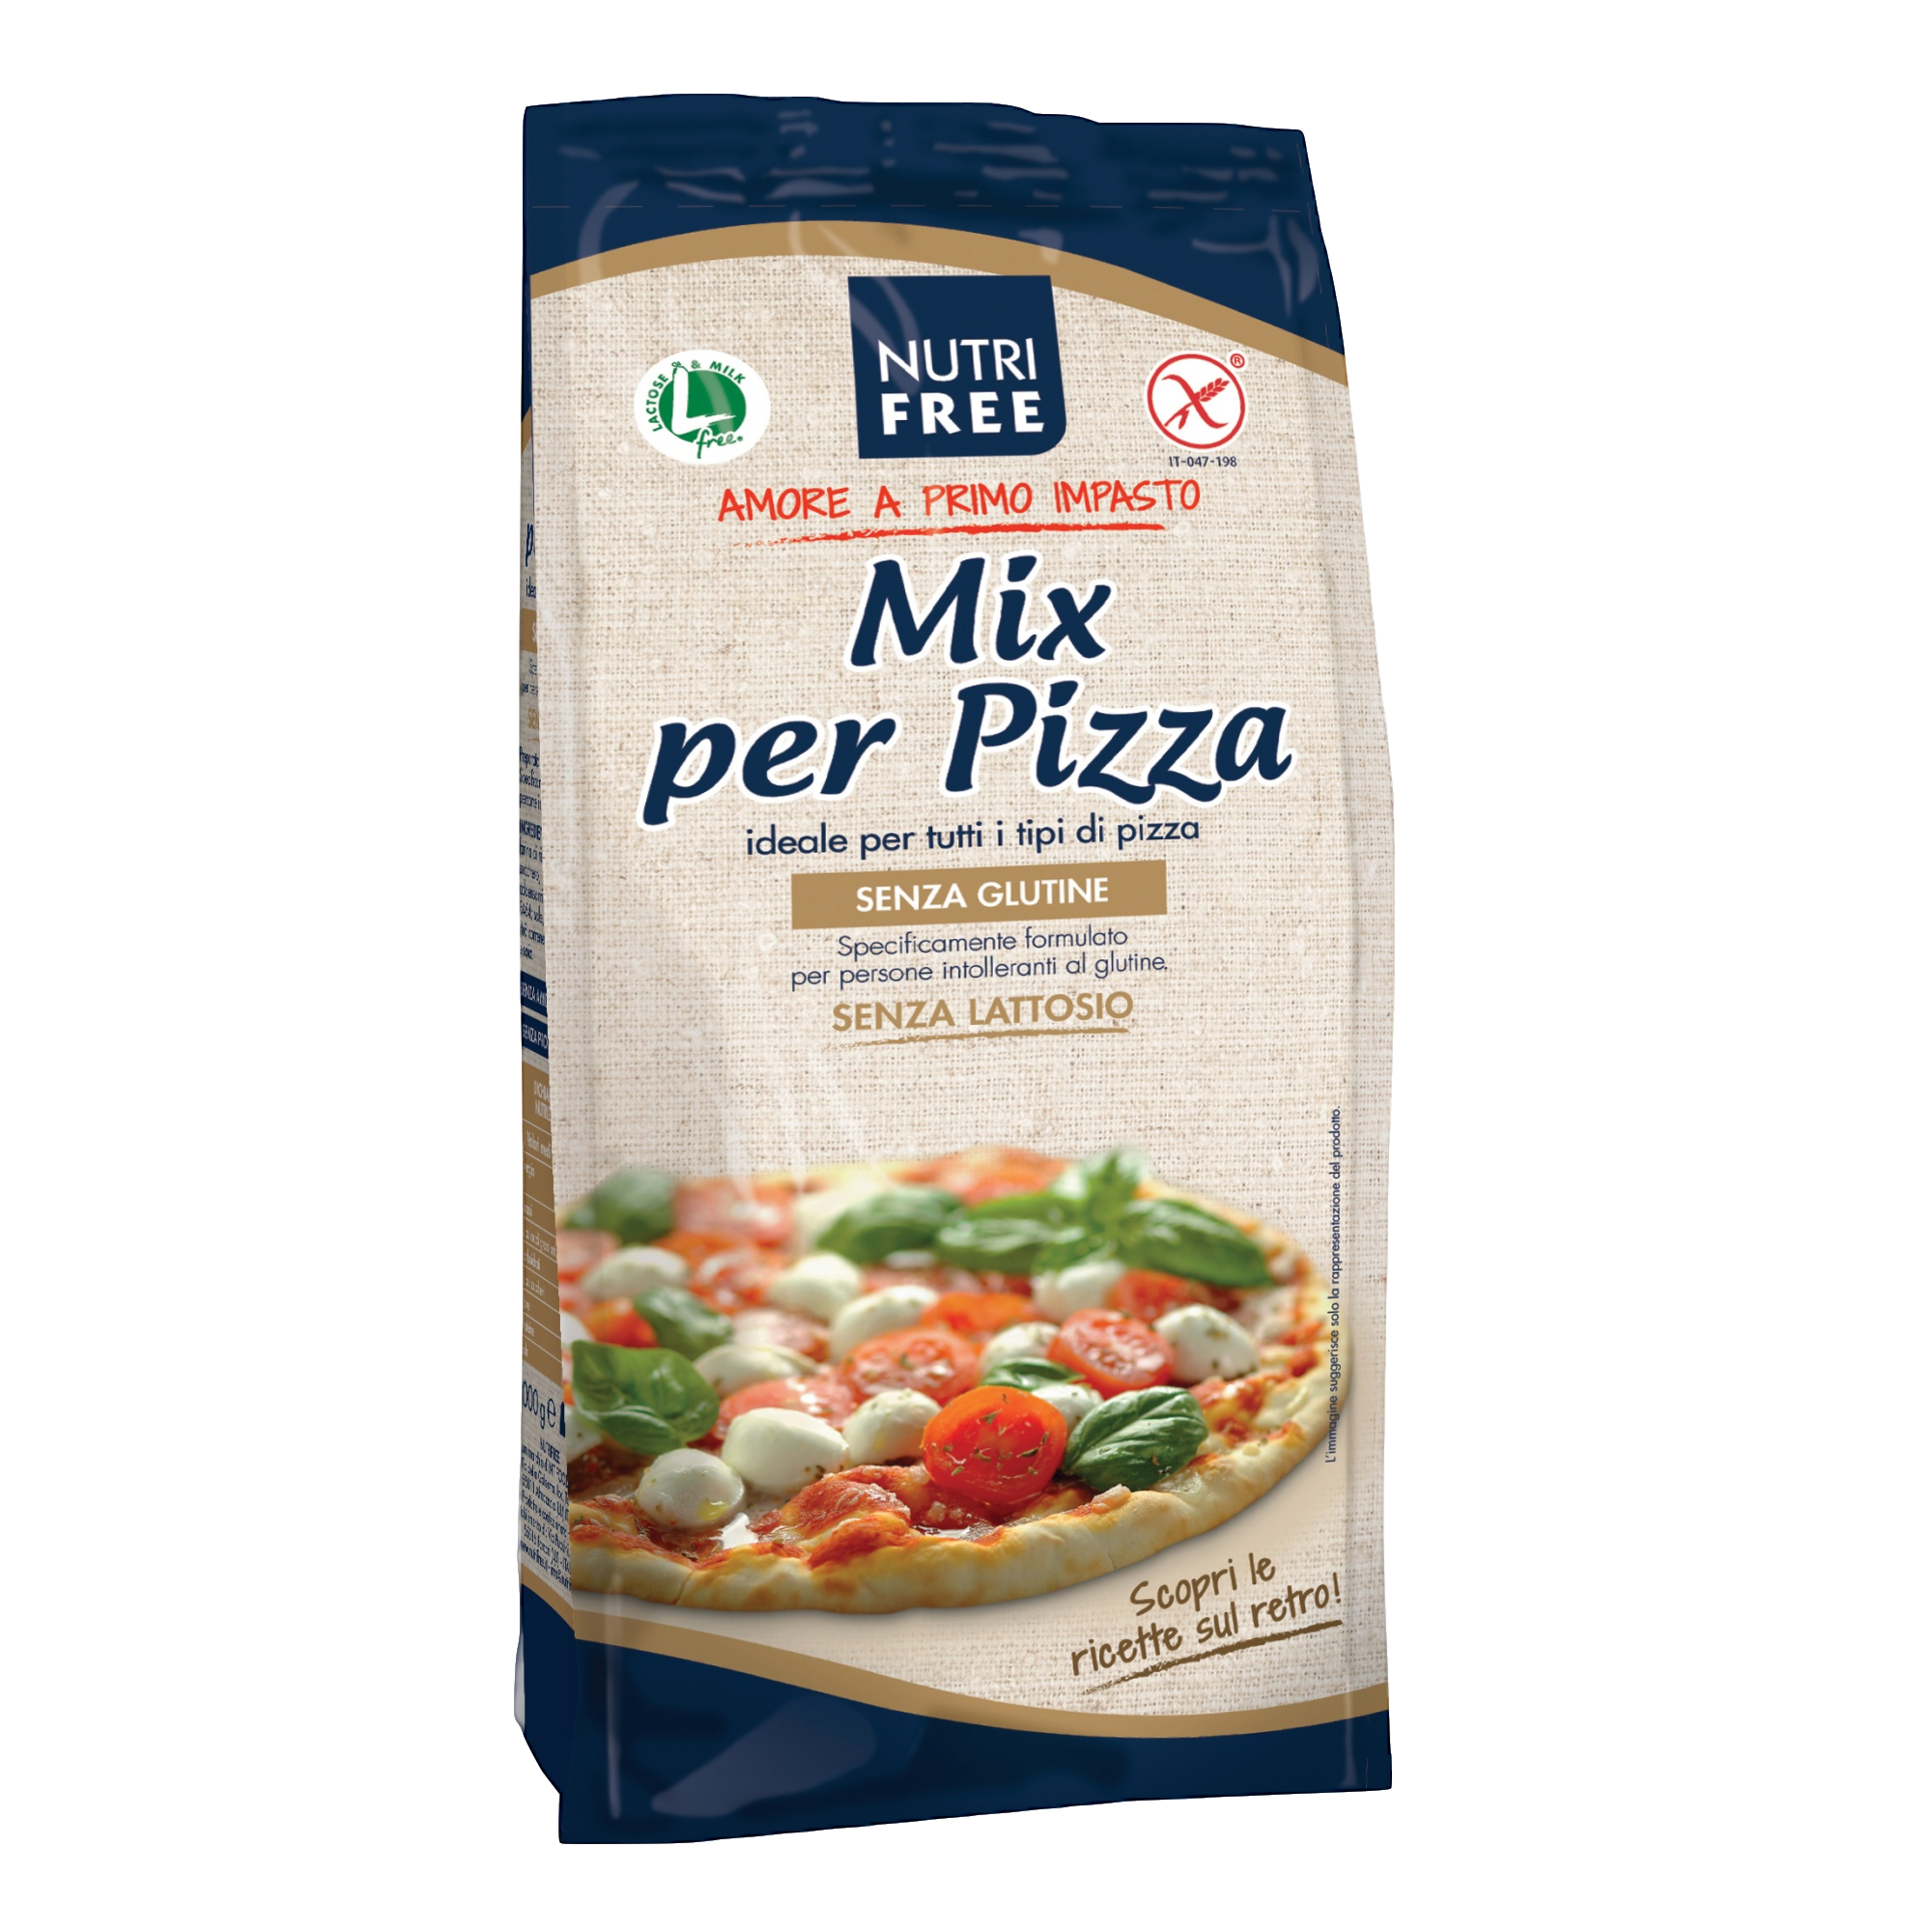 NUTRIFREE MIX PIZZA 1000G